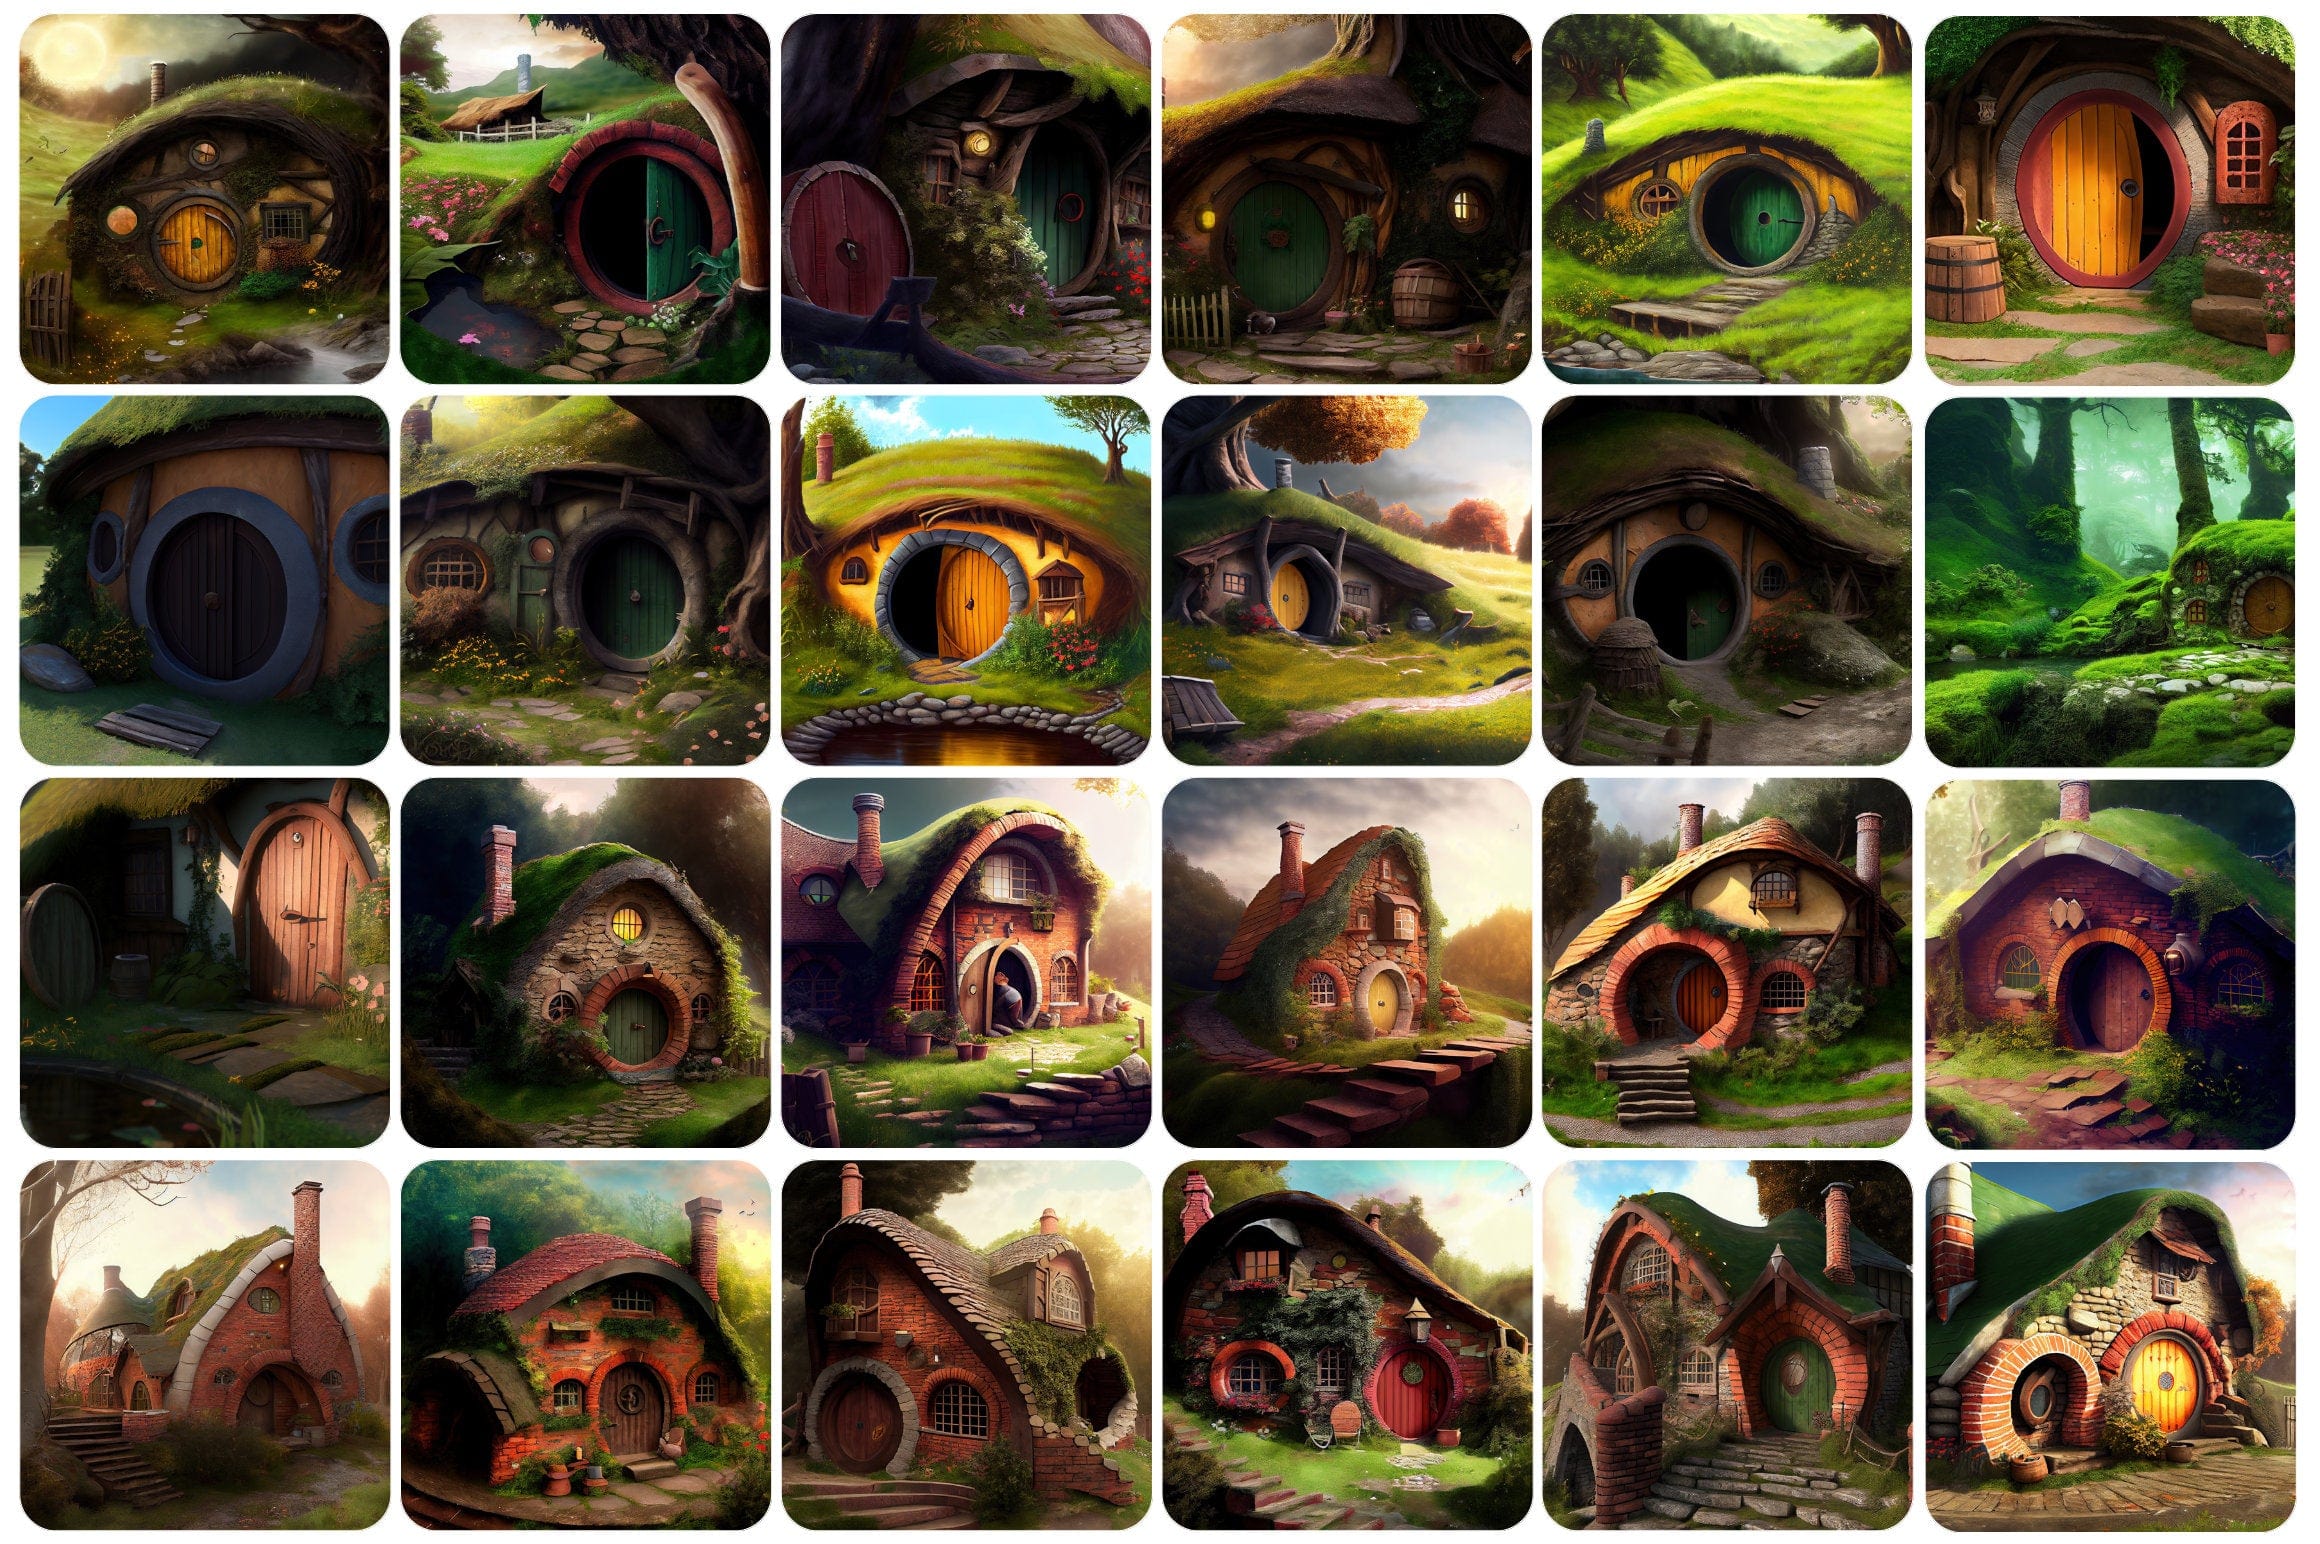 310 Unbelievable Hobbit Houses: The Ultimate Collection for Architecture and Fantasy Fans - commercial license Digital Download Sumobundle